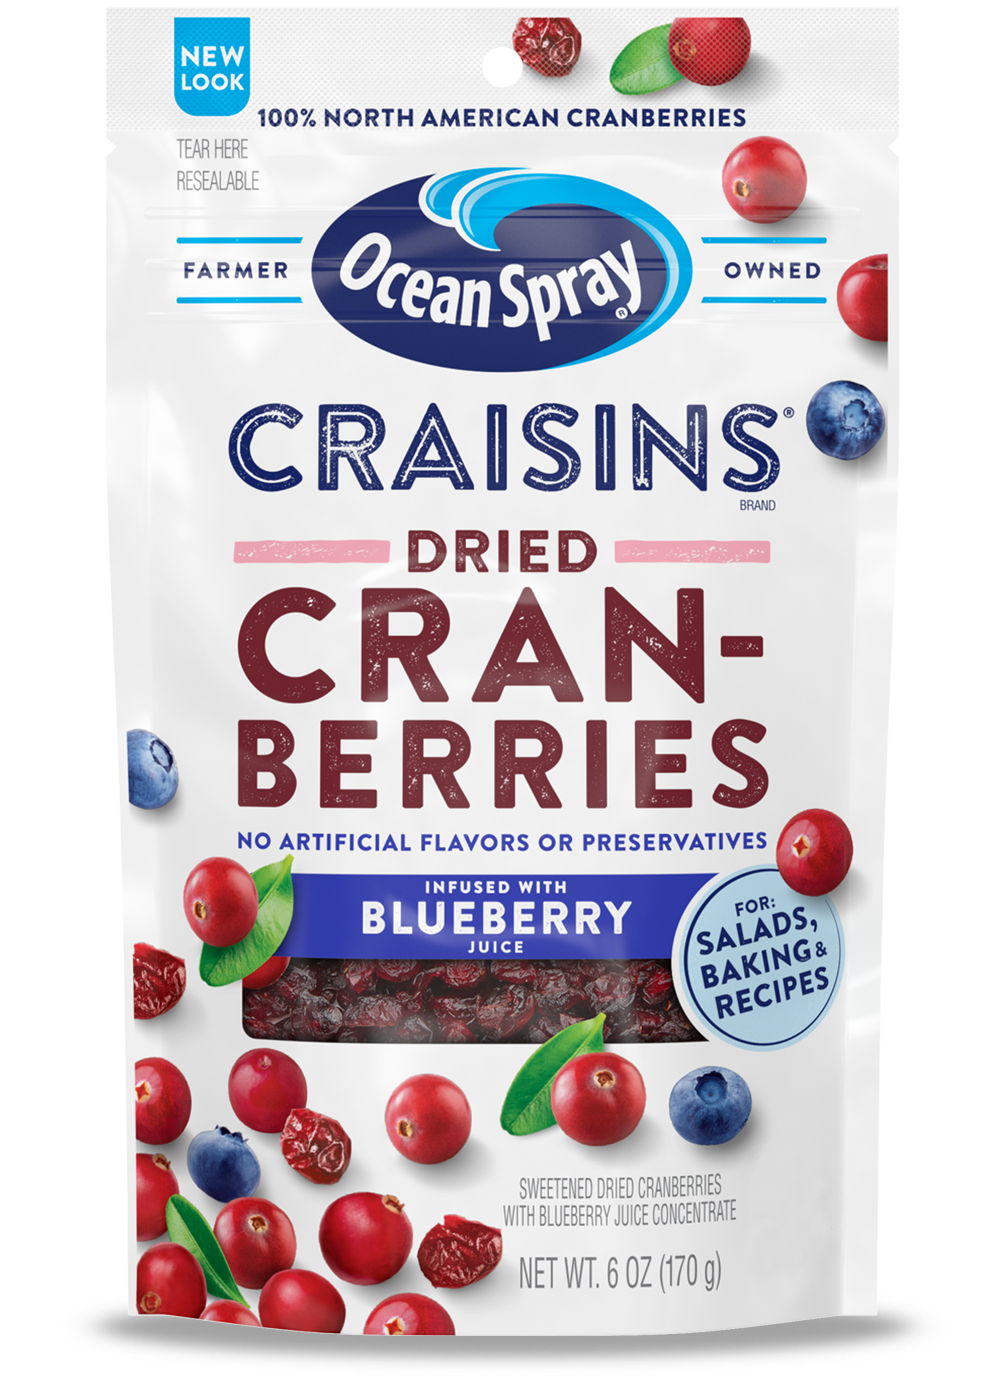 Craisins® Dried Cranberries Blueberry Juice Infused